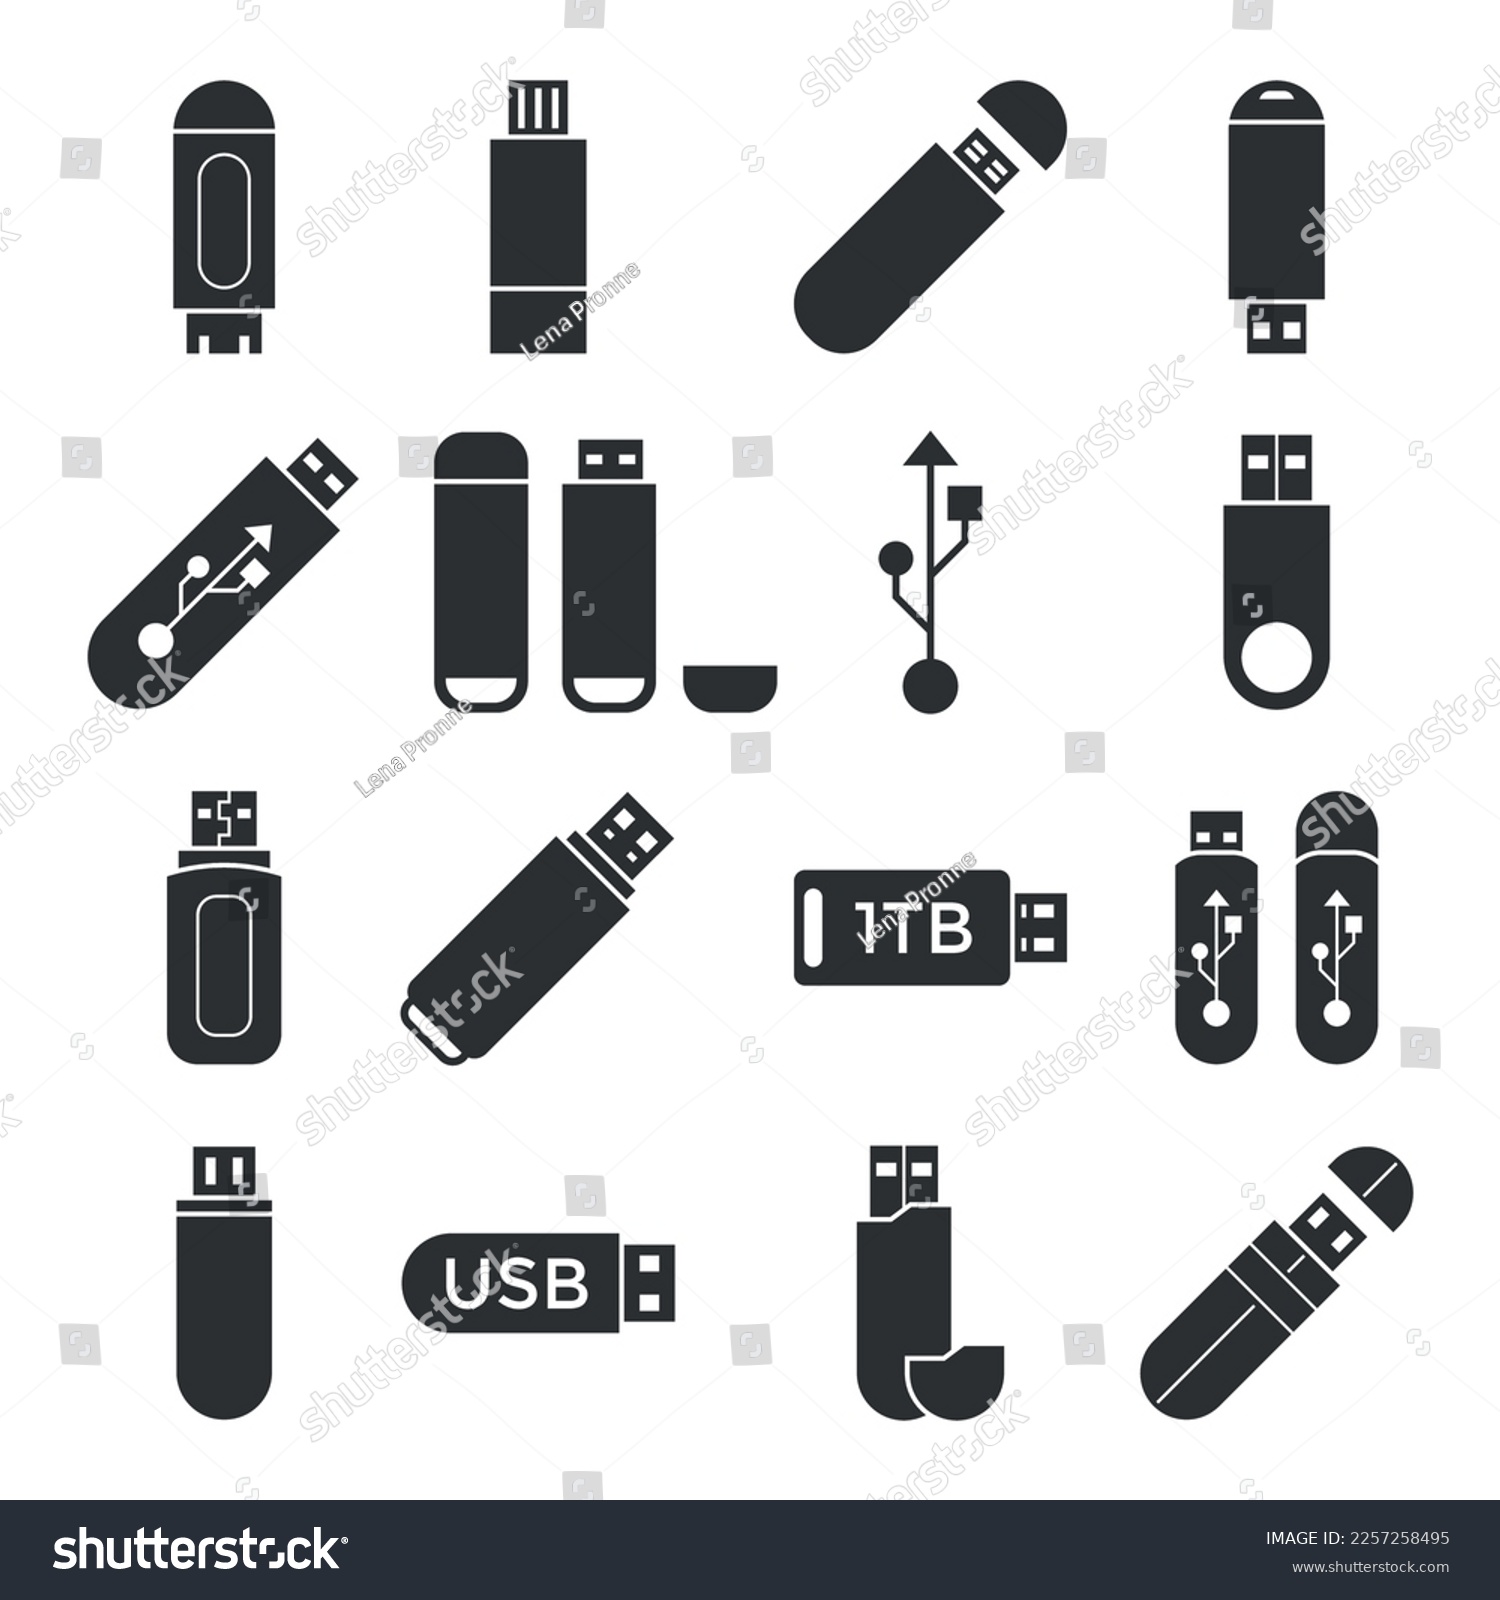 SVG of Flash drive flat icons, set silhouette data storage devices. svg